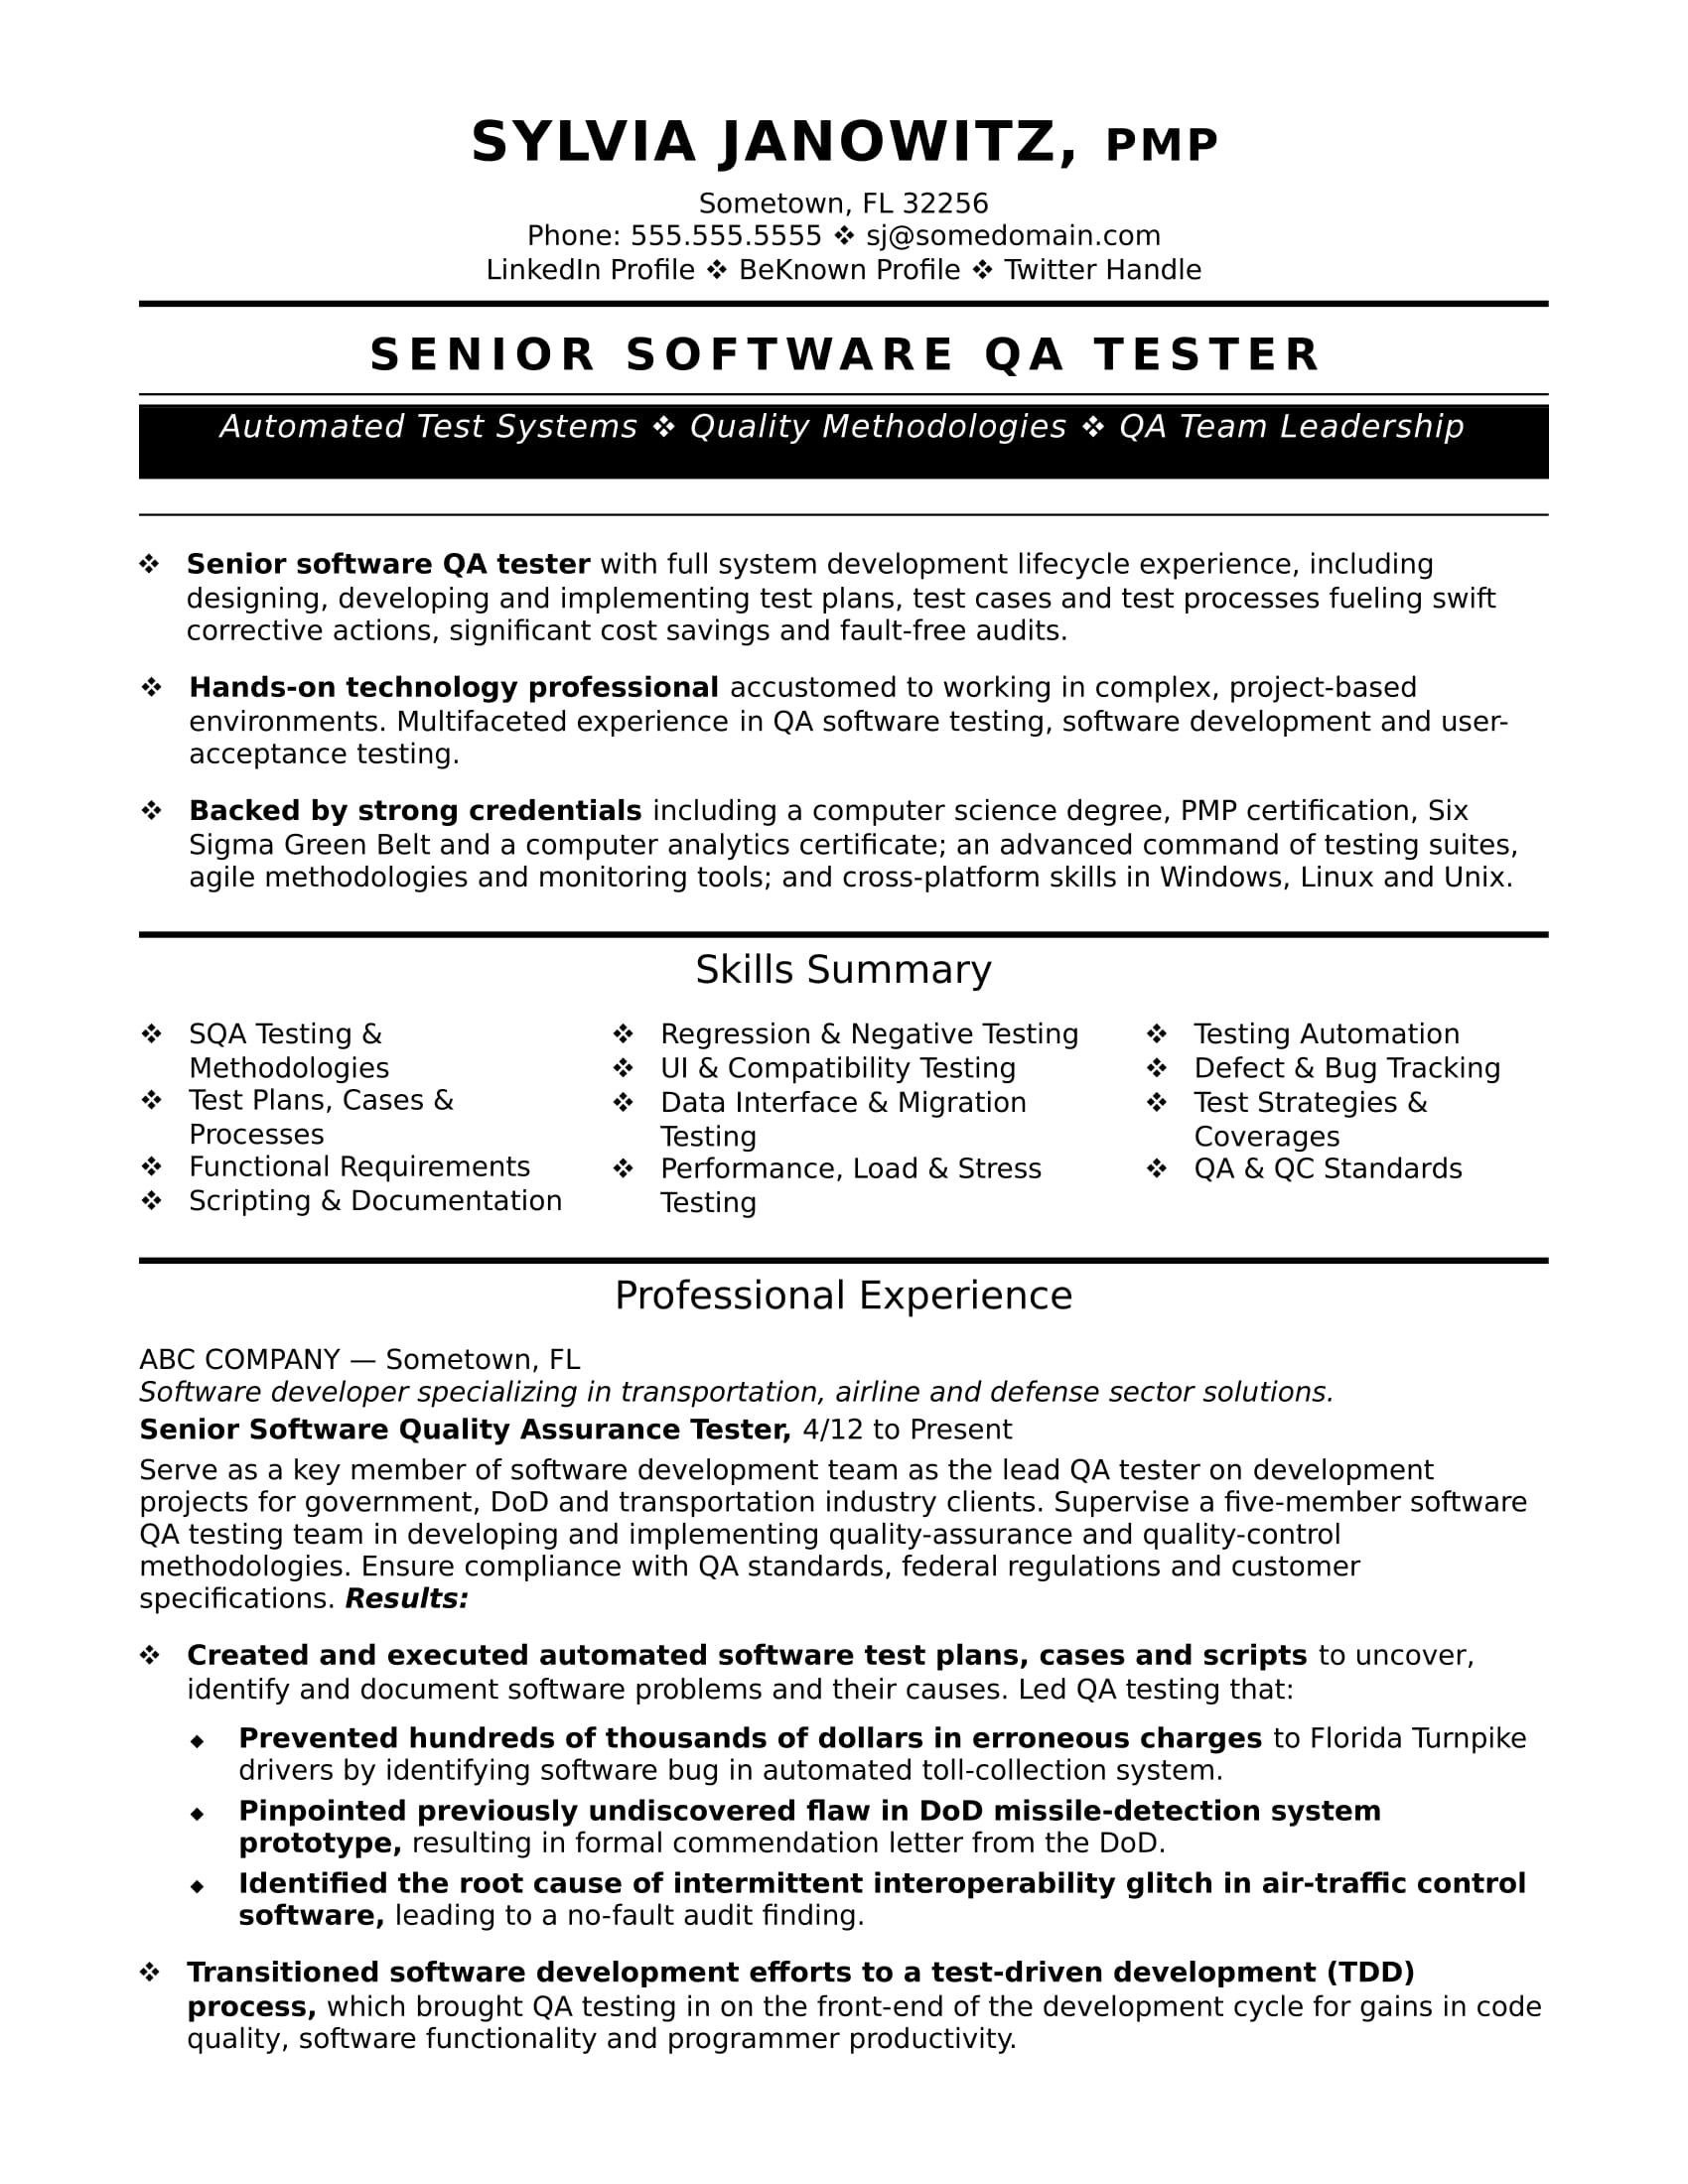 Resume Samples for Experienced software Testing Professionals Experienced Qa software Tester Resume Sample Job Resume Examples …